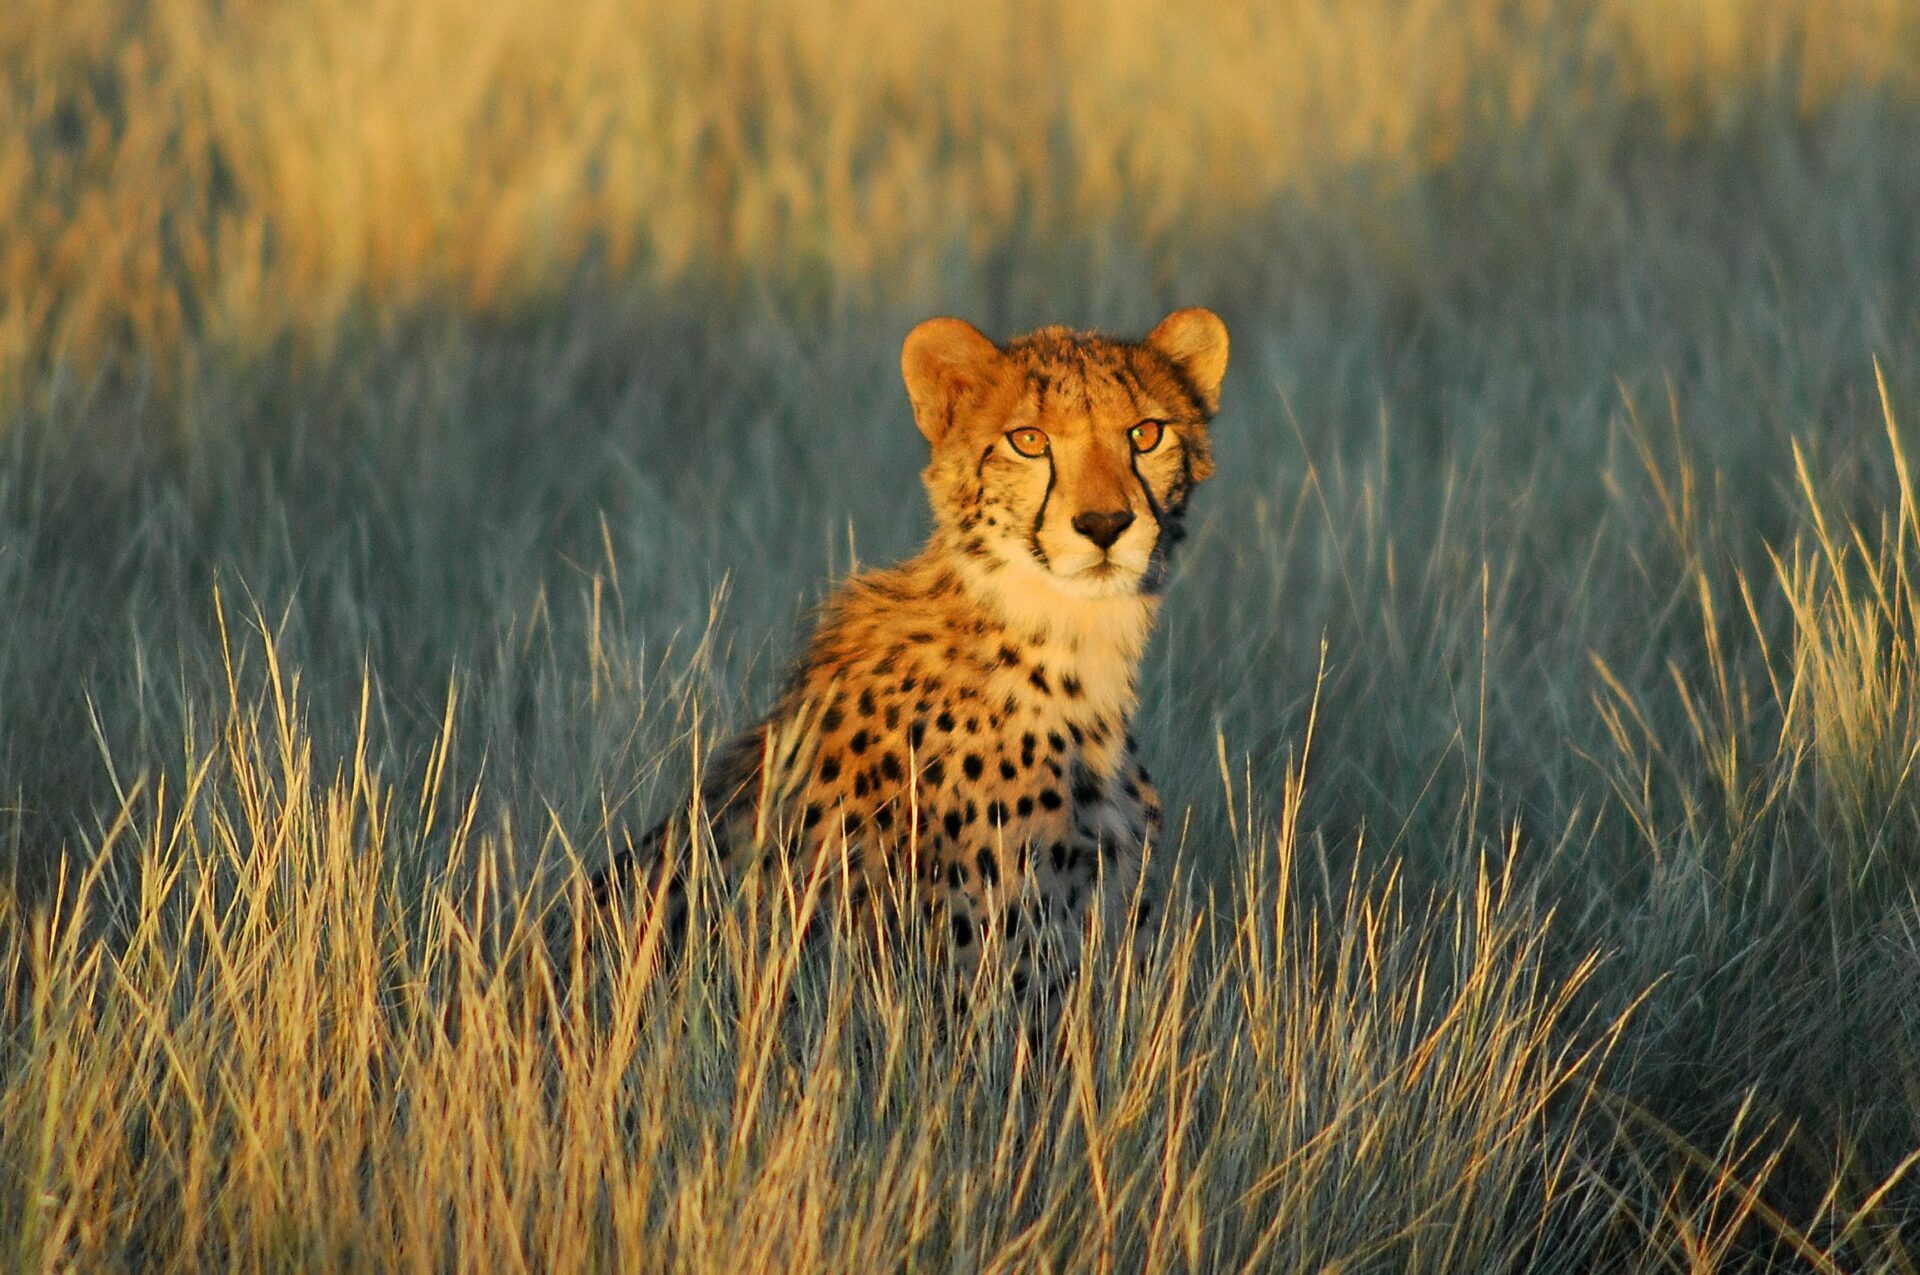 cheetah stares out into the distance among the tall golden grass with the shadow of the sun setting behind him